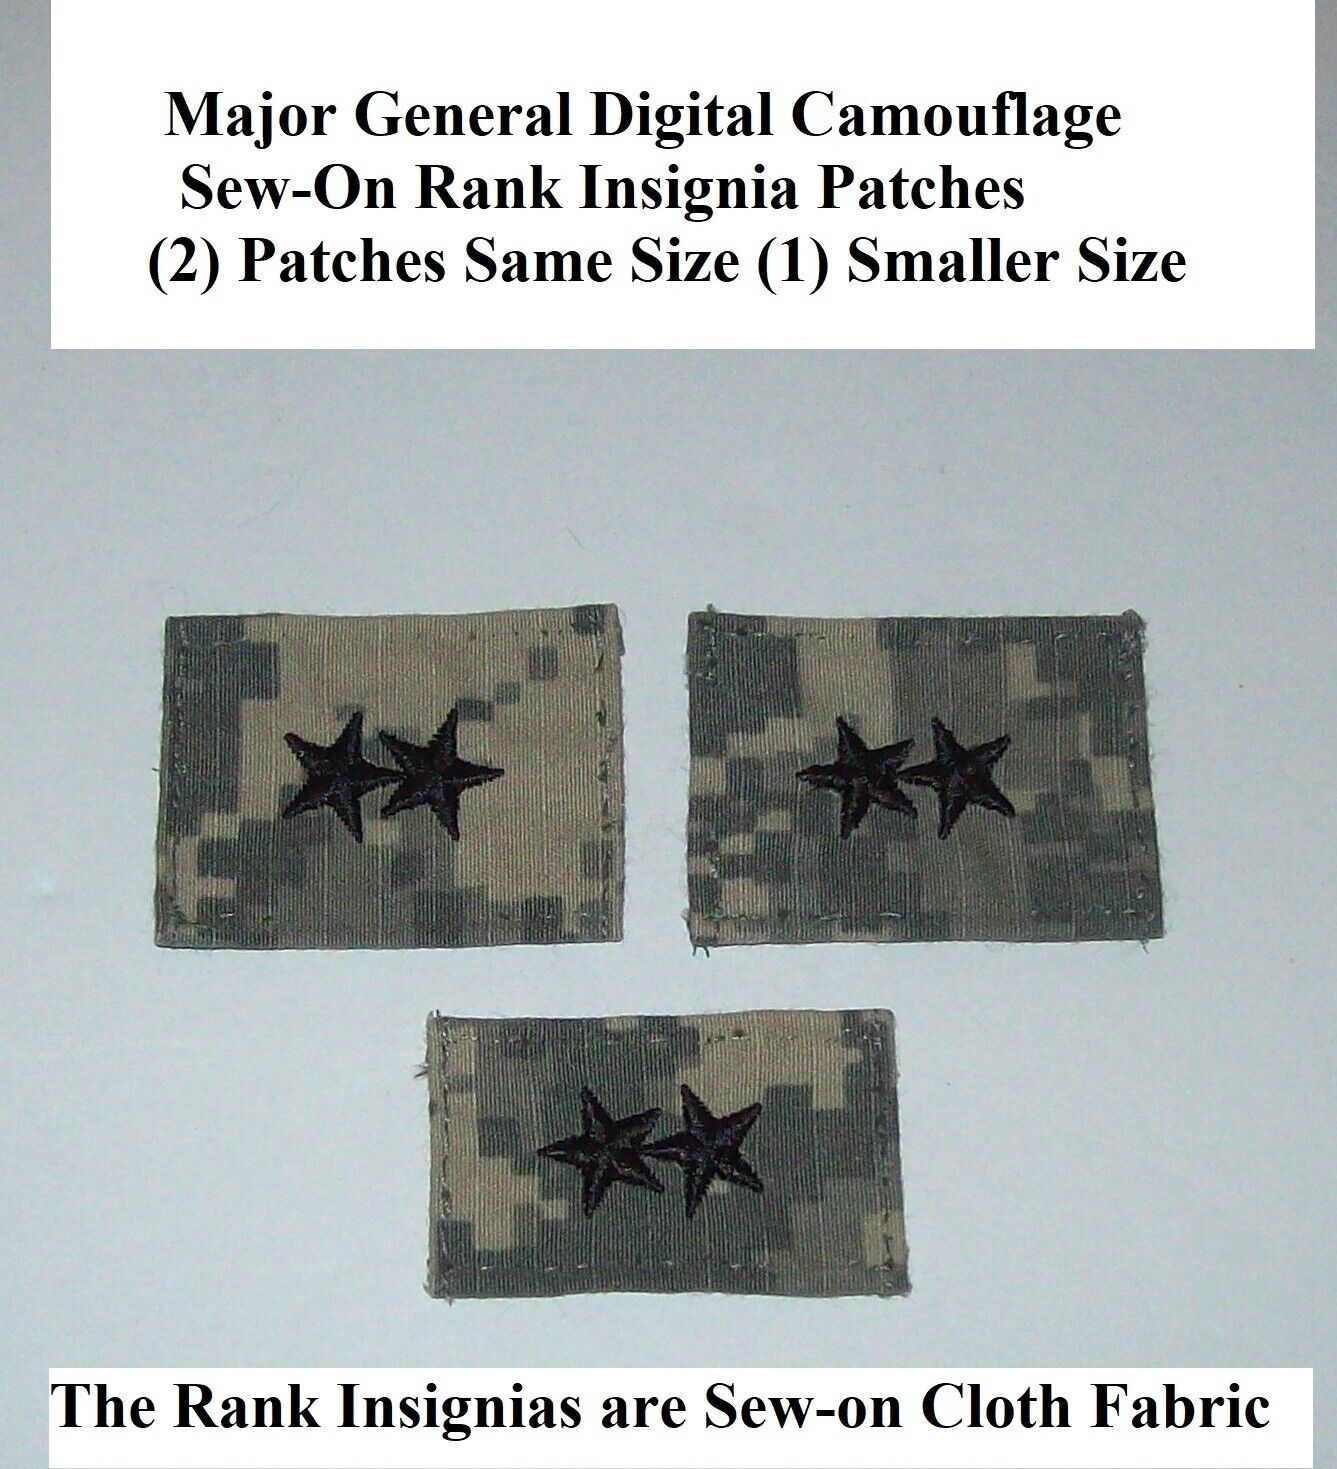 Major General Digital Camouflage Cloth Sew-on Rank Insignias Lot of (3)